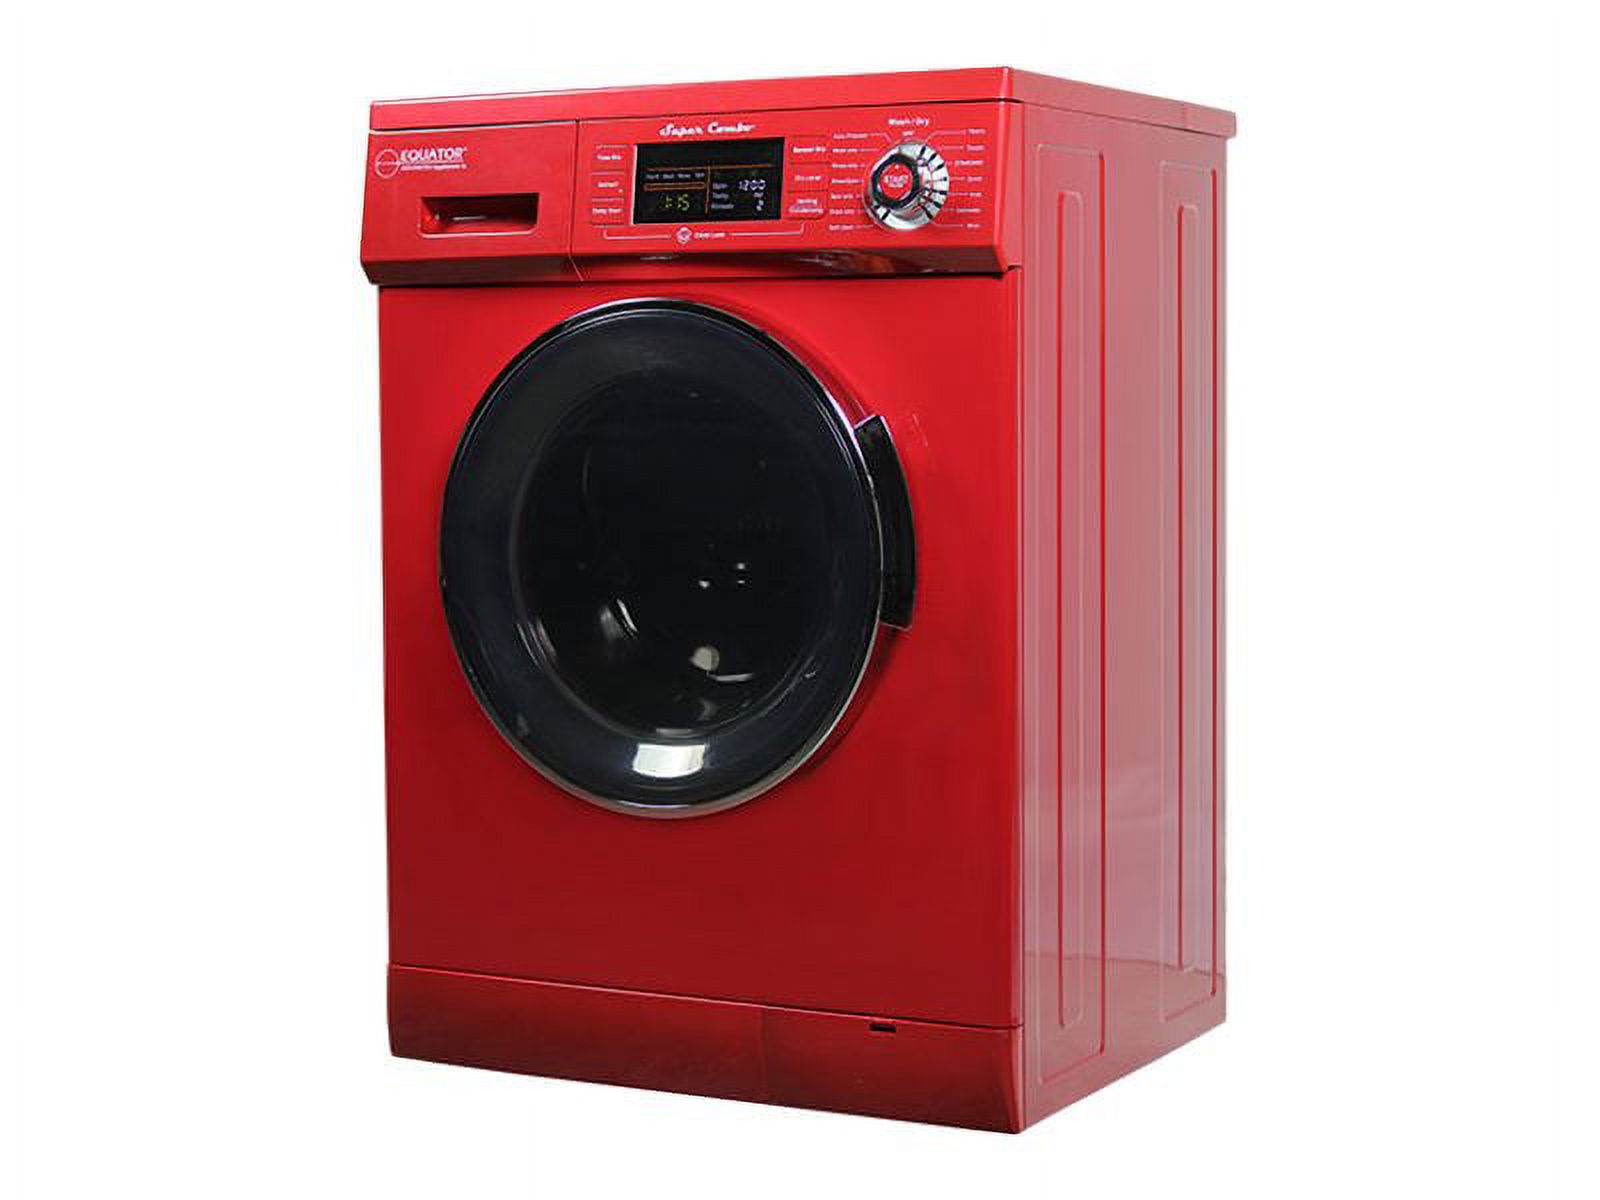 Equator All-in-one 13 lb Compact Combo Washer Dryer, Red - image 2 of 6